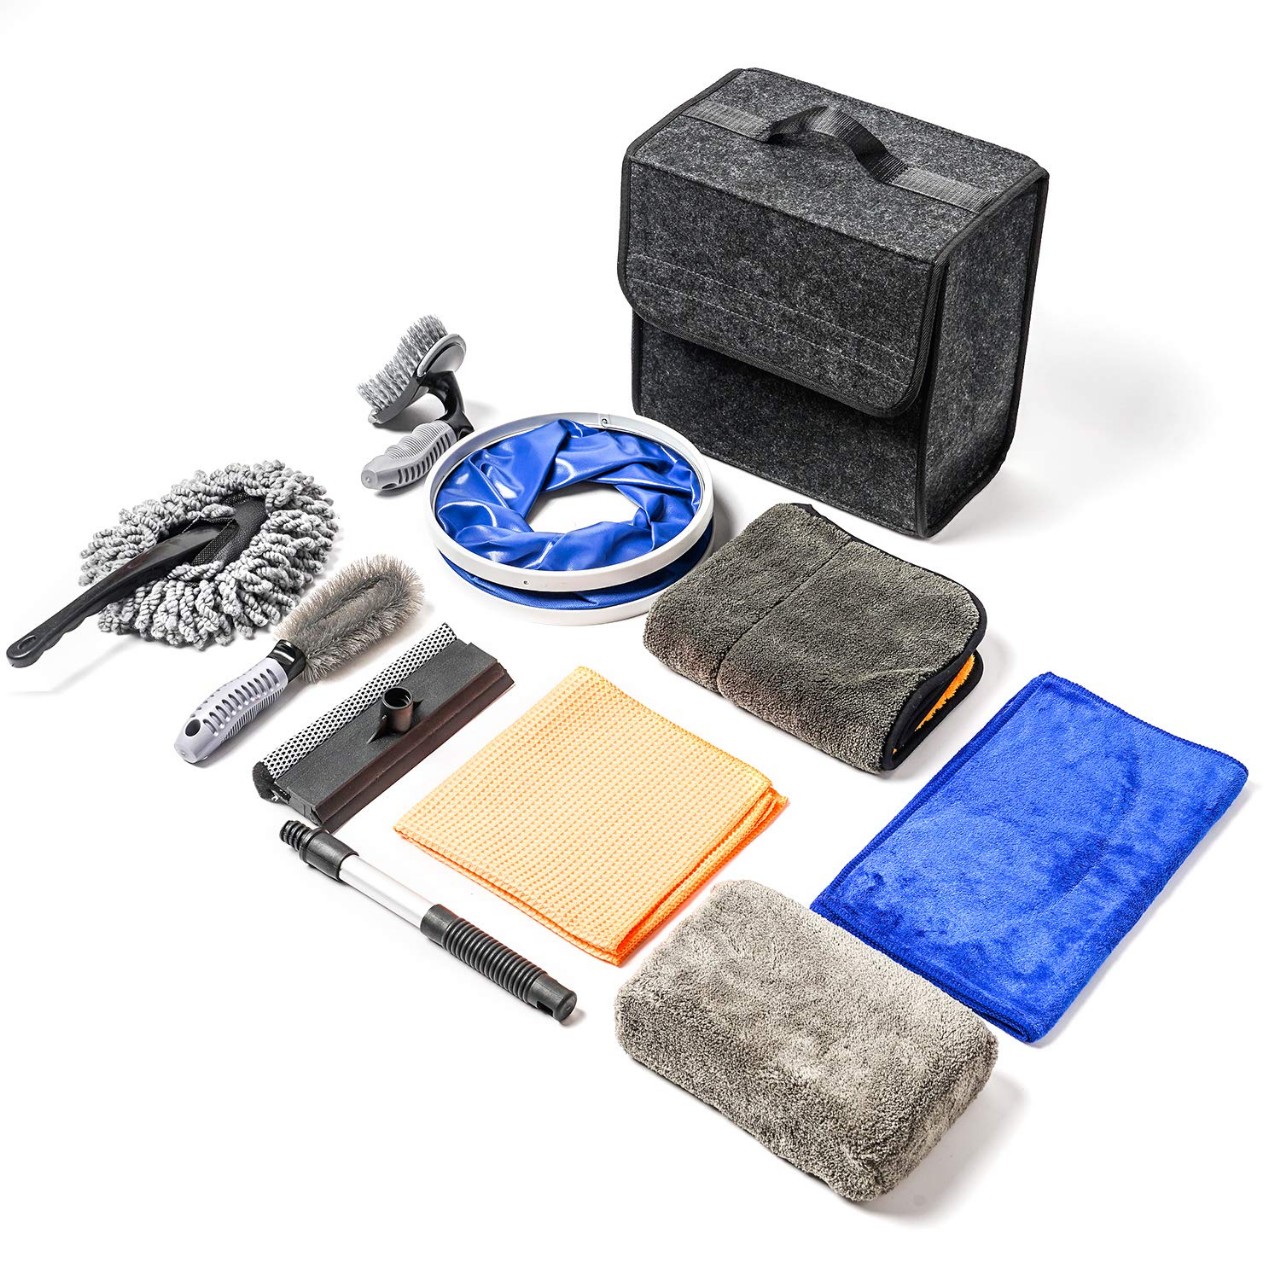 10 Pcs Car Wash Kit for Interior and Exterior Cleaning Including Microfiber Cloths Sponge Duster